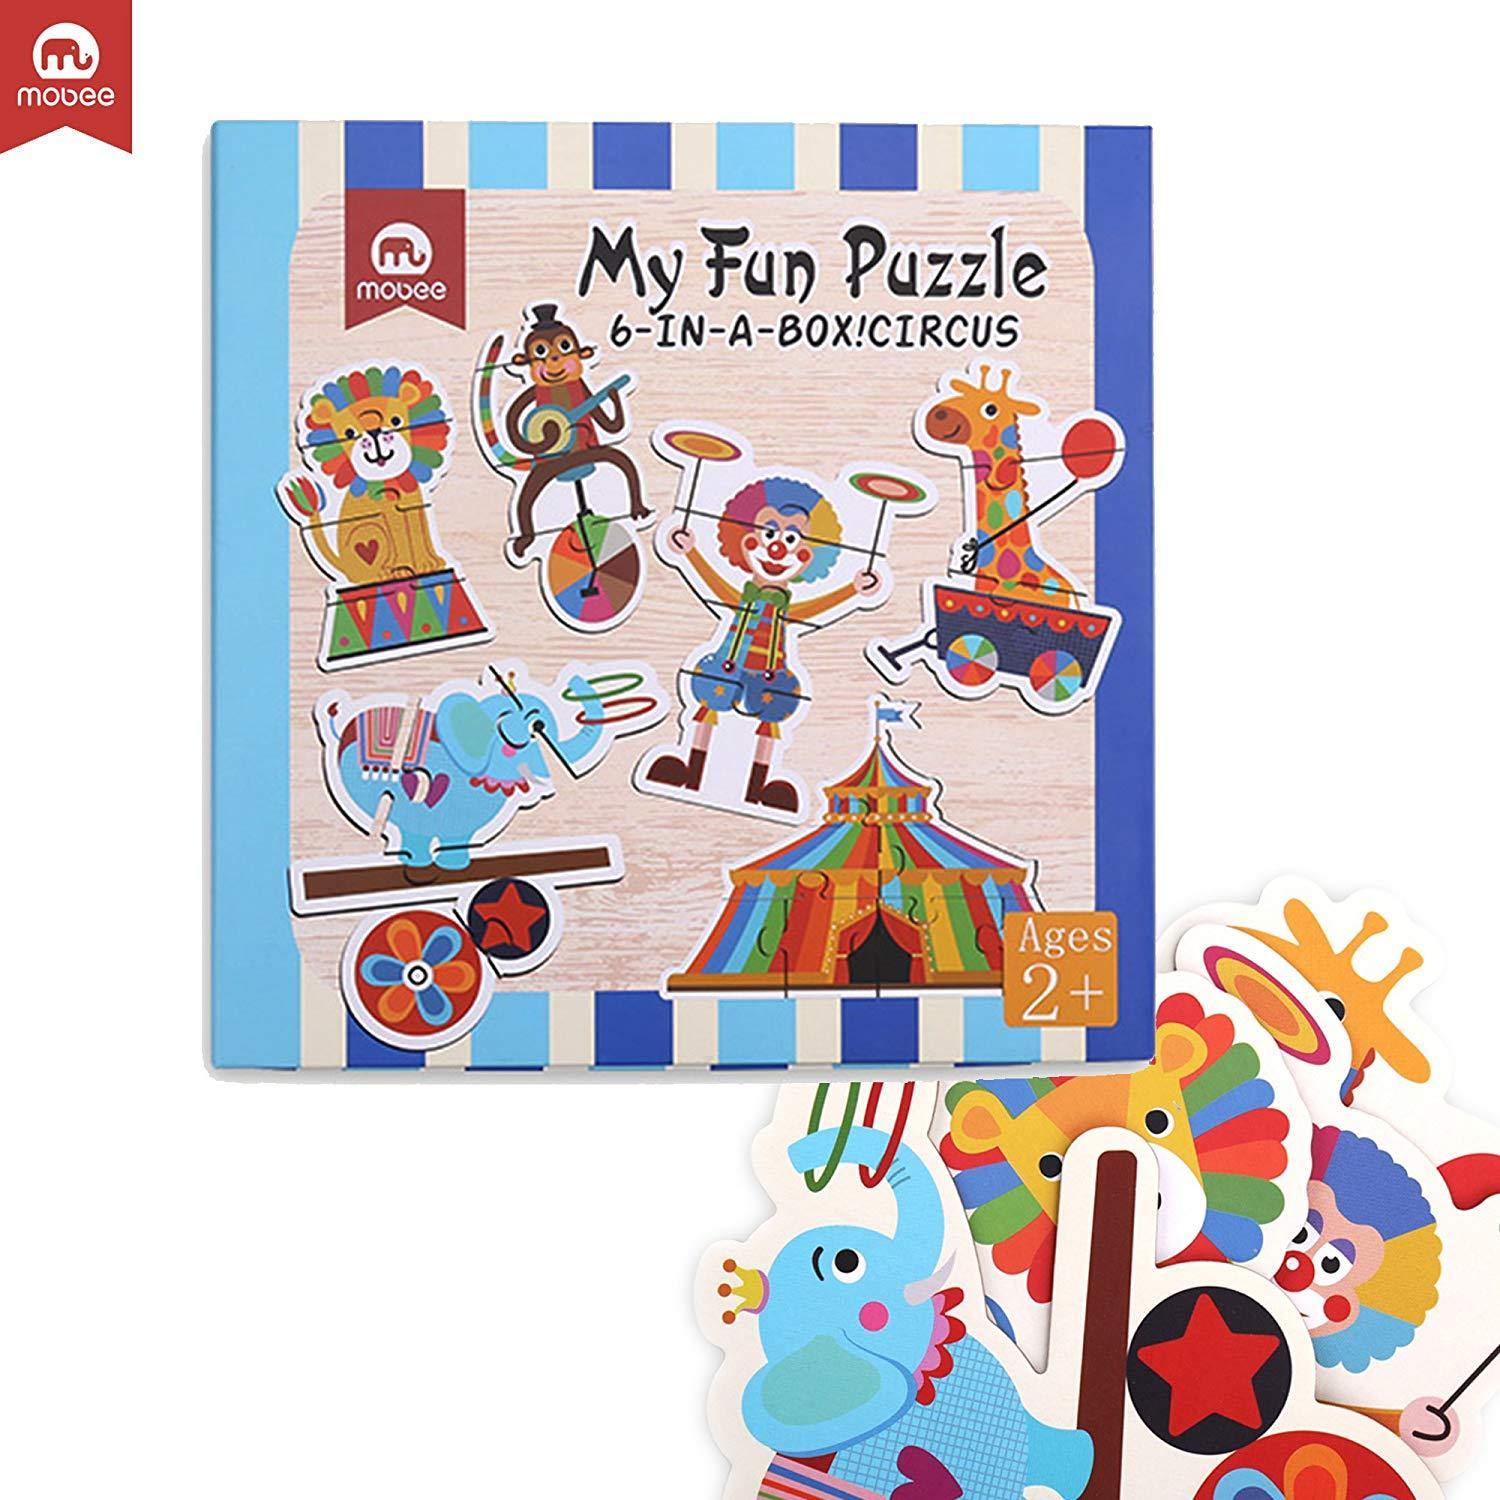 Bosonshop 6-in-1 Educational Jigsaw Puzzles with Reference Sample for Preschool Kids, Circus Puzzle